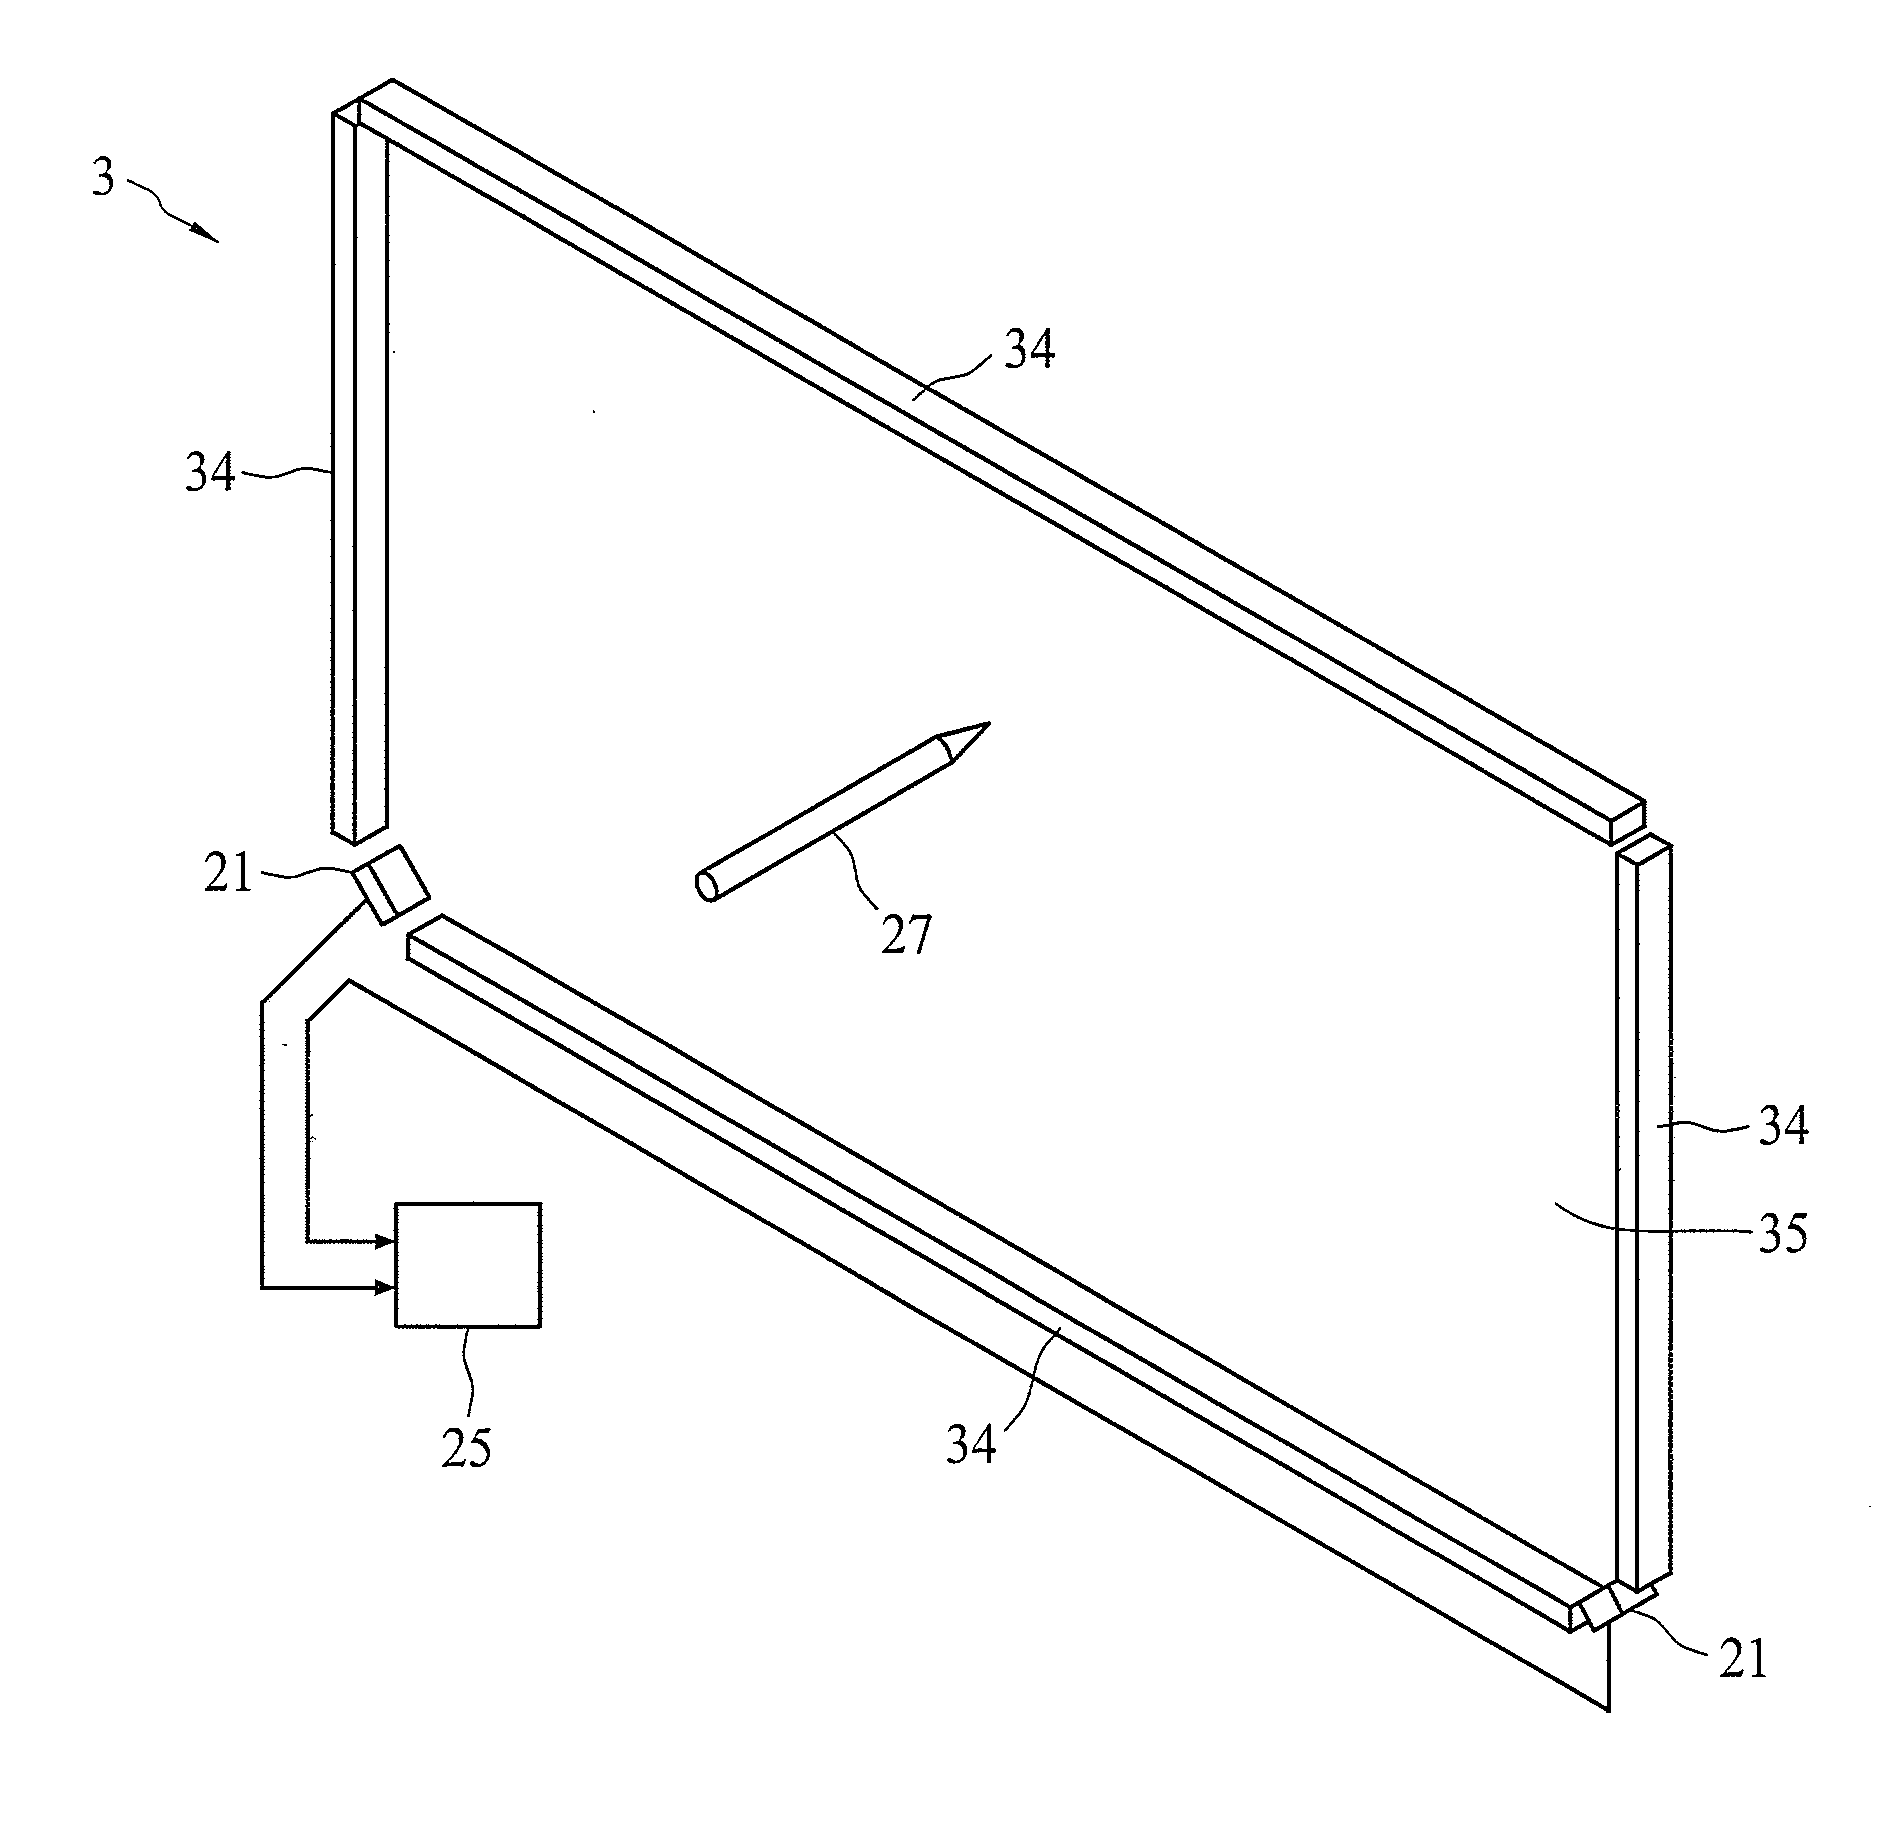 Image processing method for optical touch system